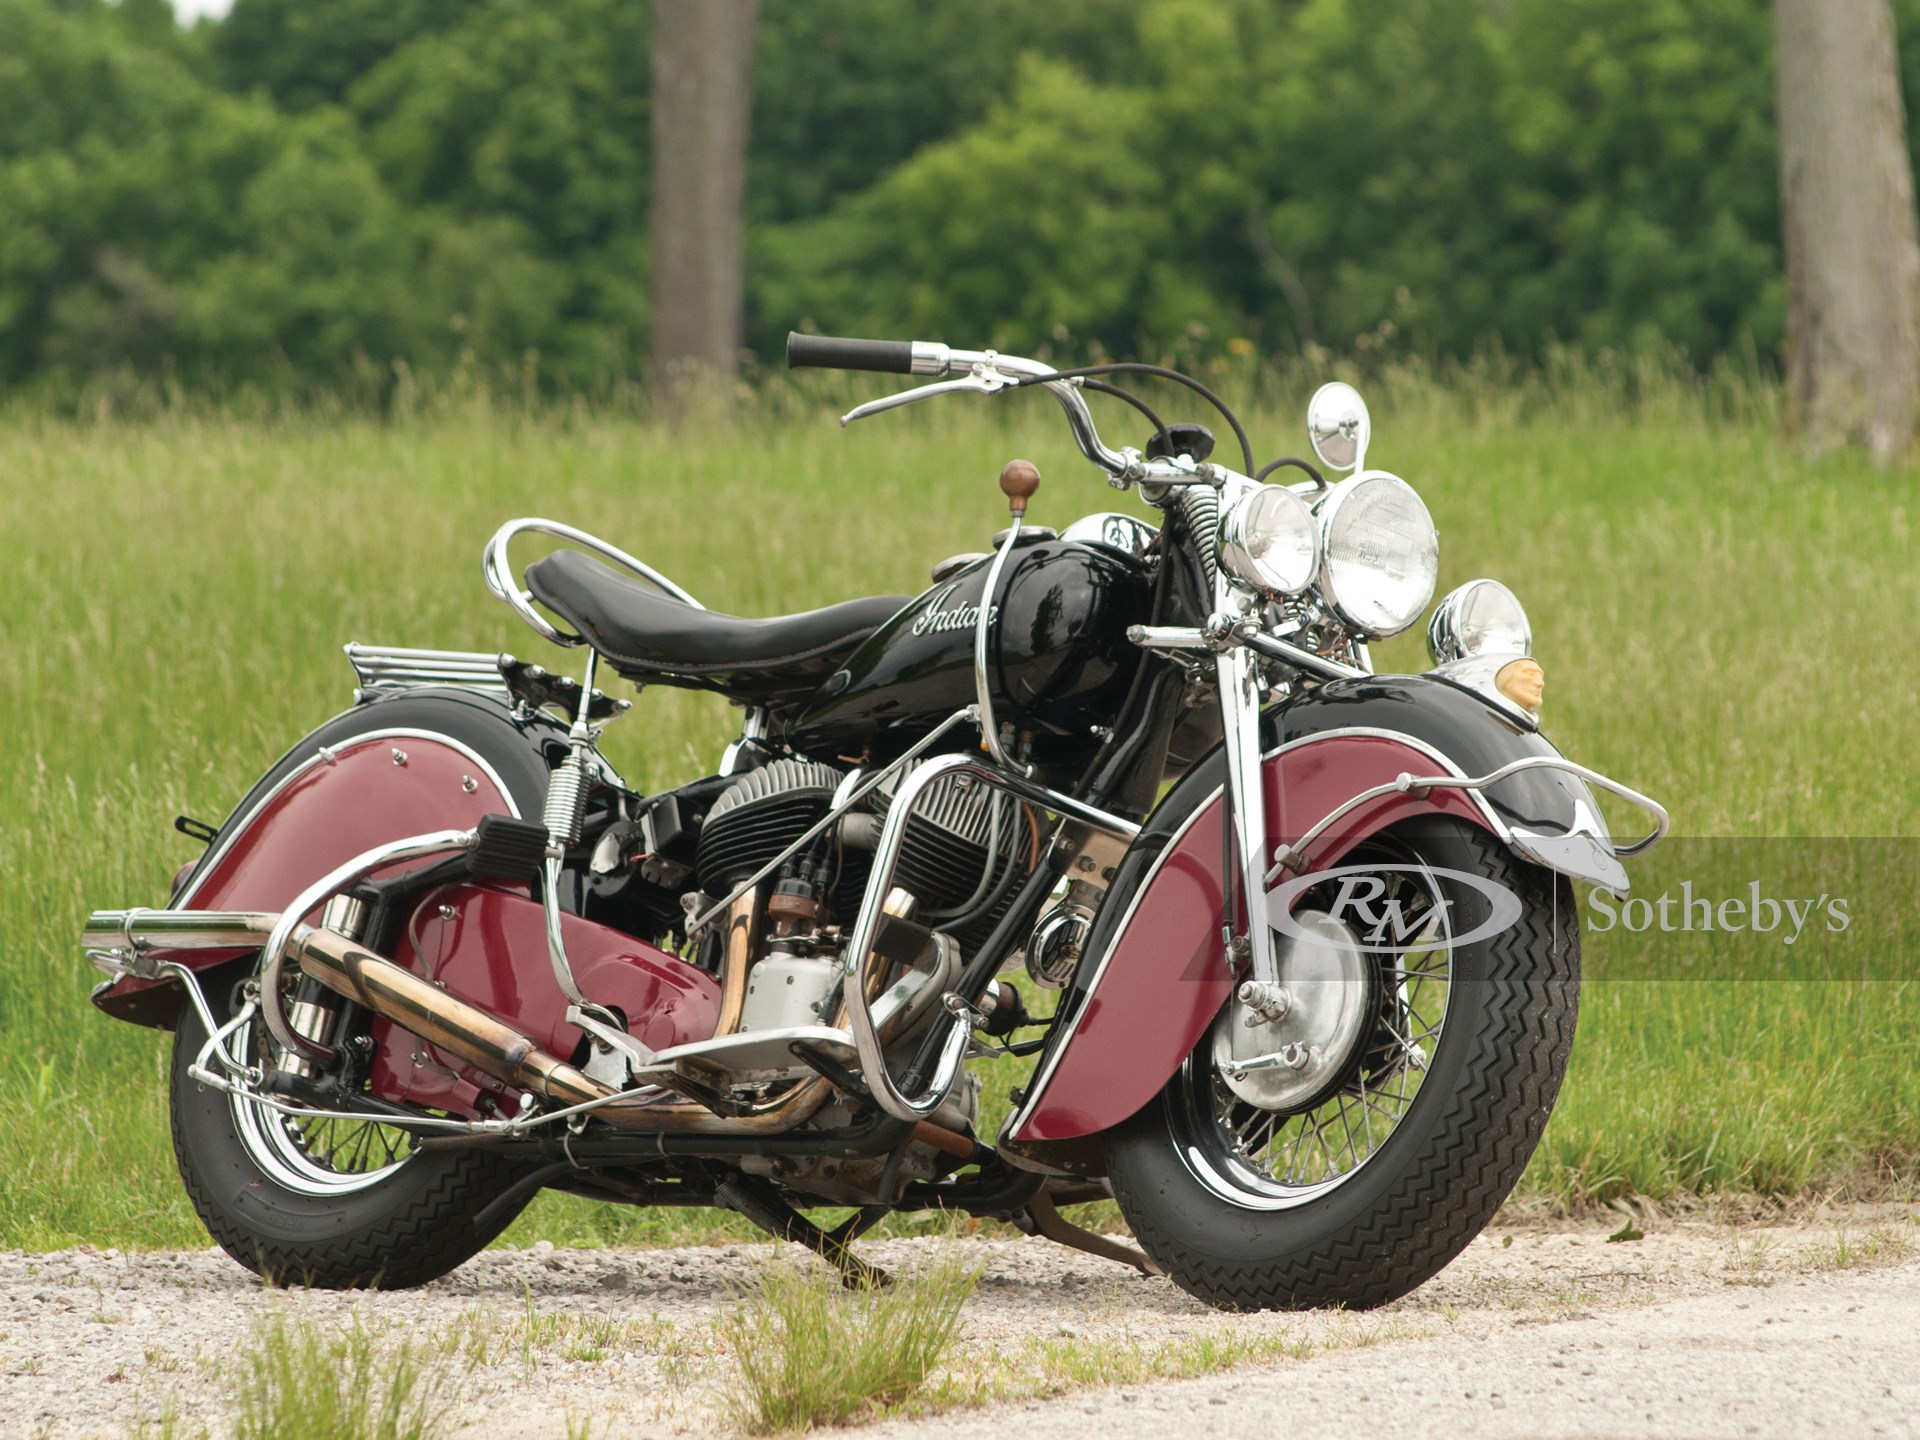 1947 Indian Chief 